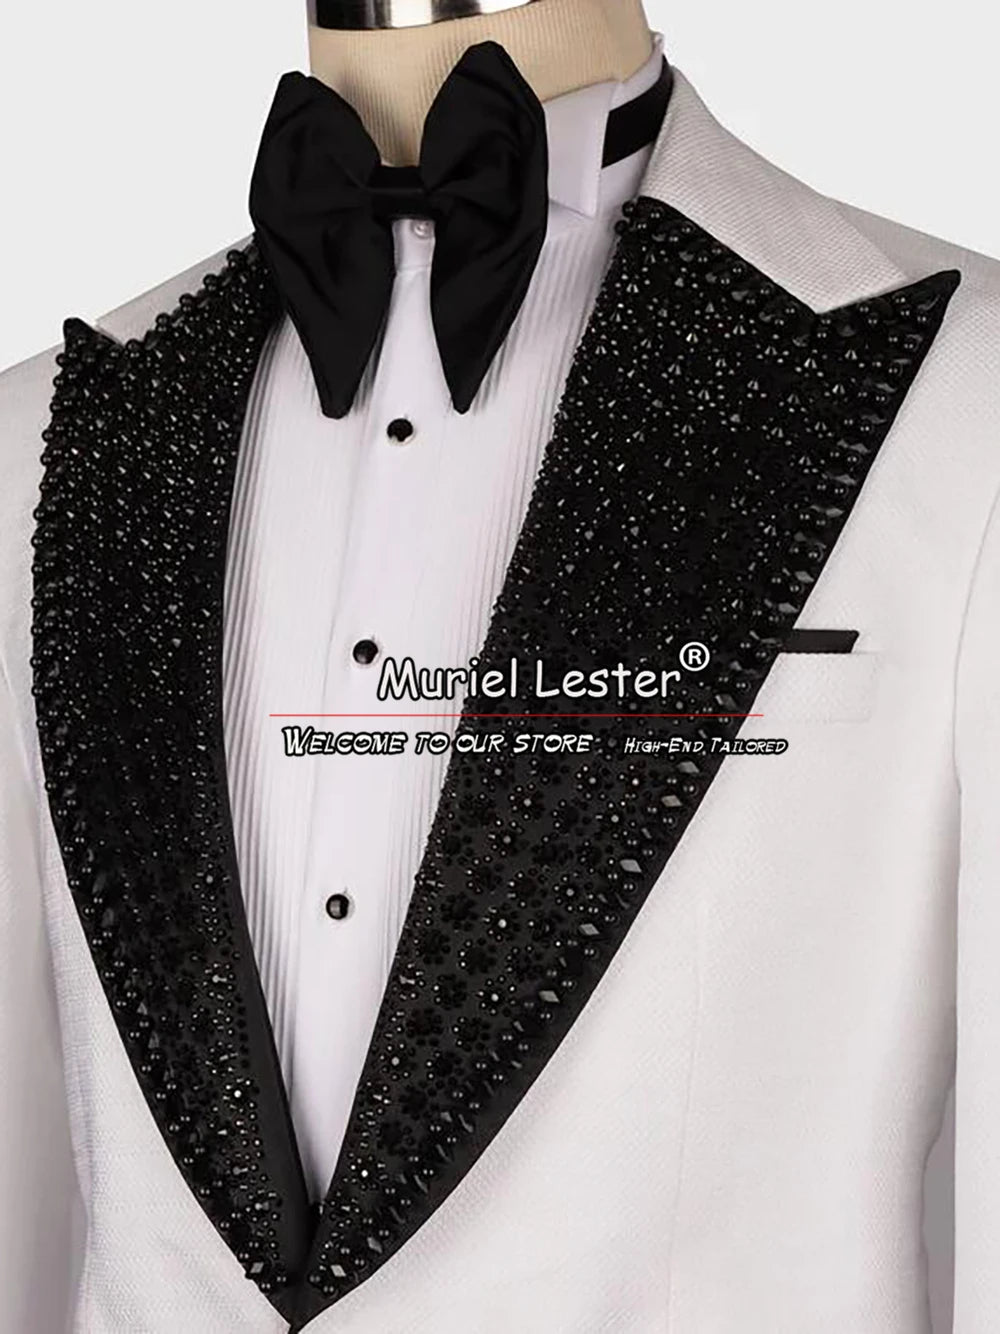 Luxury Groom Wedding Suits Luxury Formal Prom Party Tuxedo Tailor-Made Gem Stone Peaked Lapel Jacket Vest Pants 3 Pieces Dress